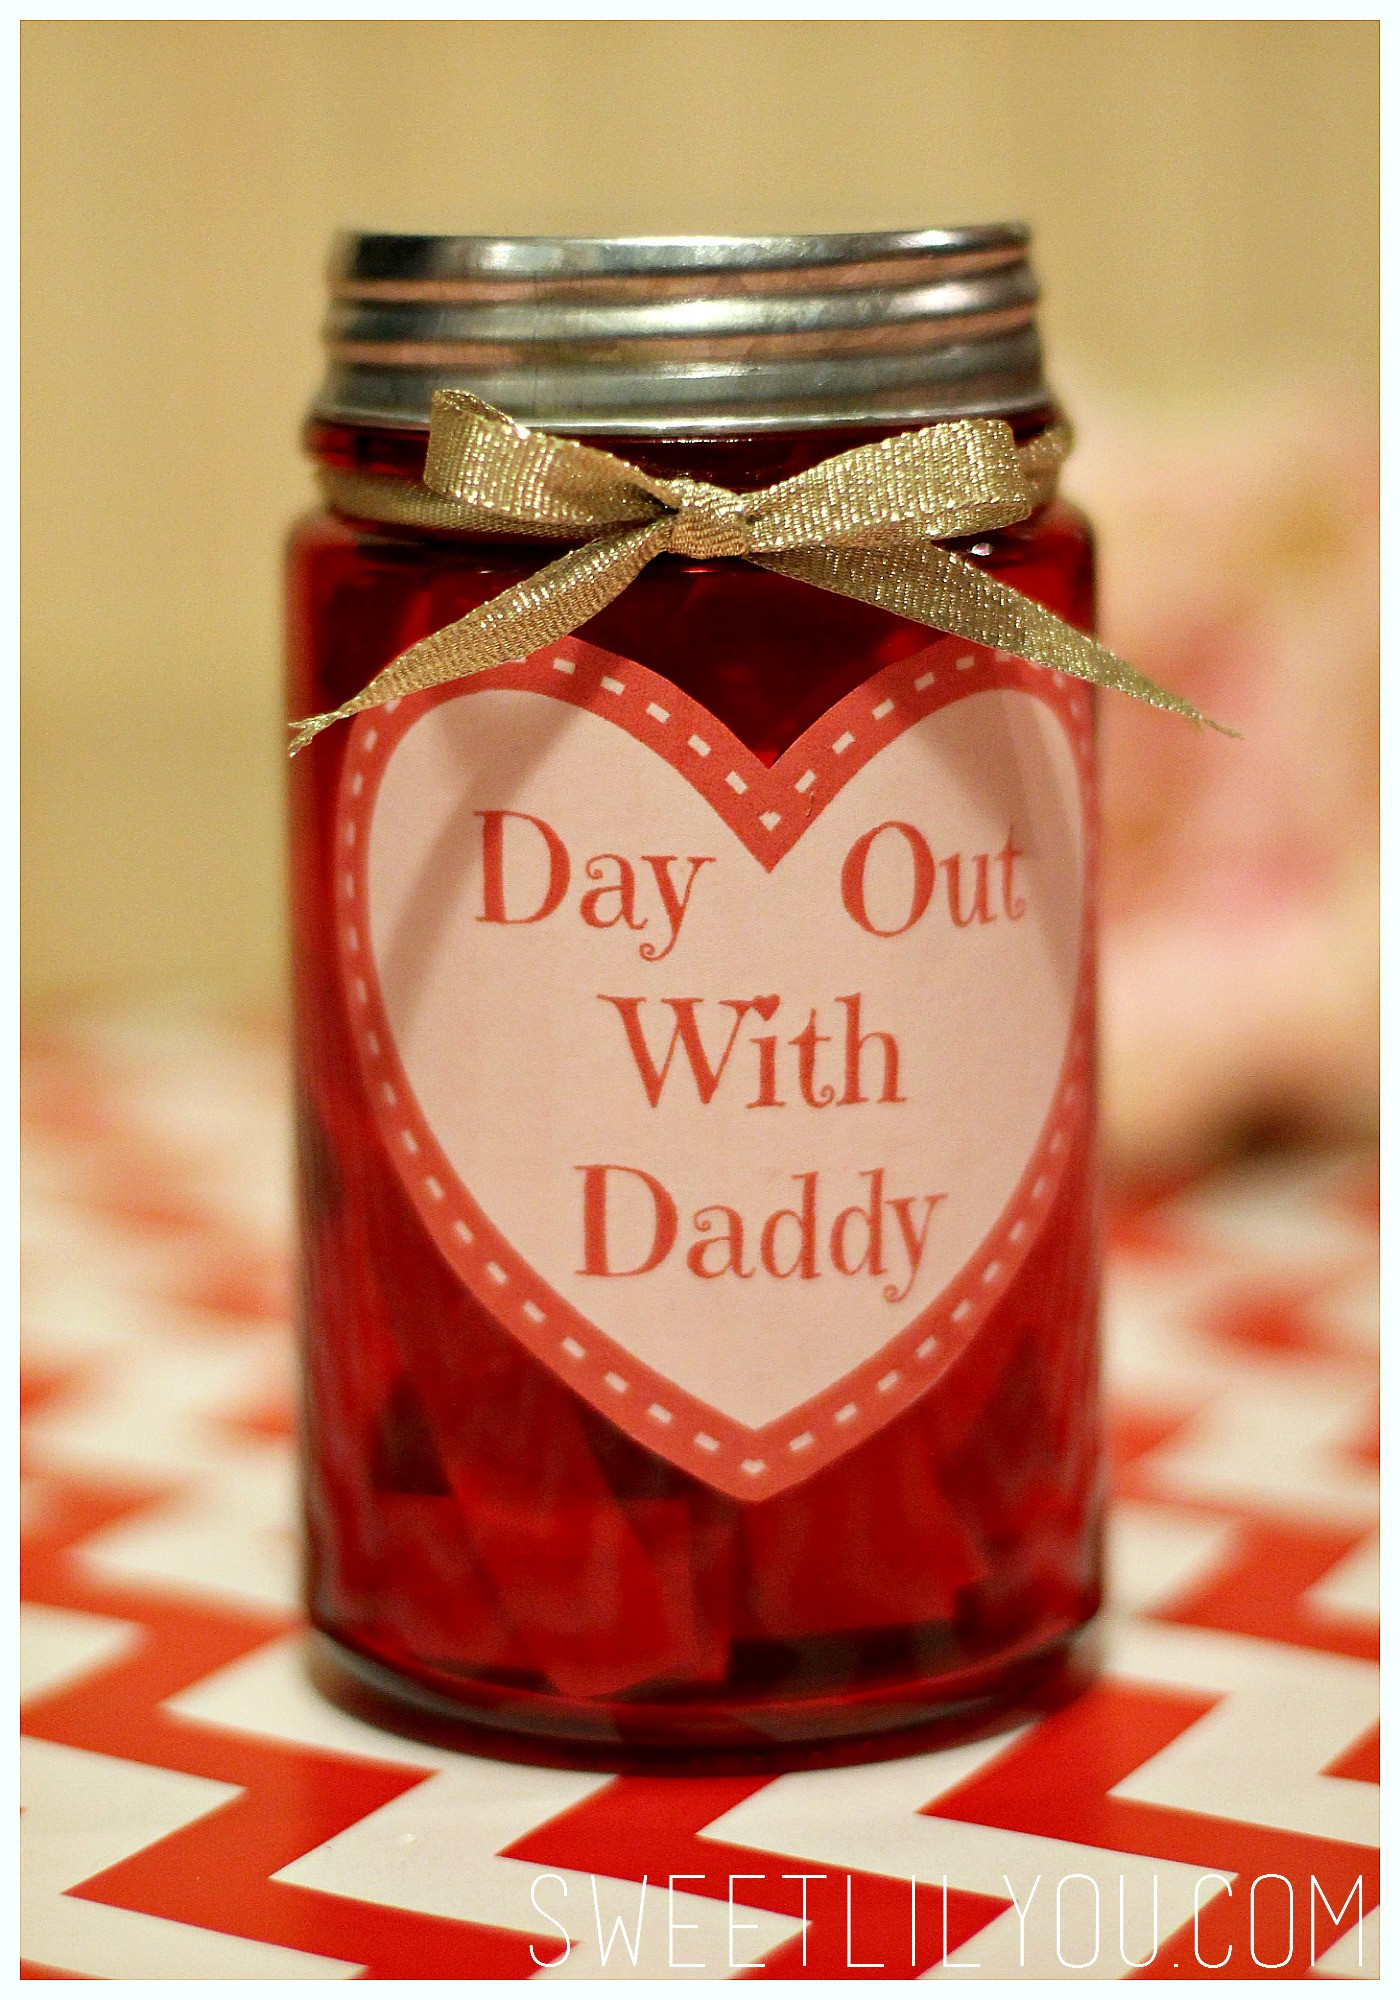 Valentine Gift Ideas For Father
 Day Out With Daddy Jar Valentine s Day Gift for Dad